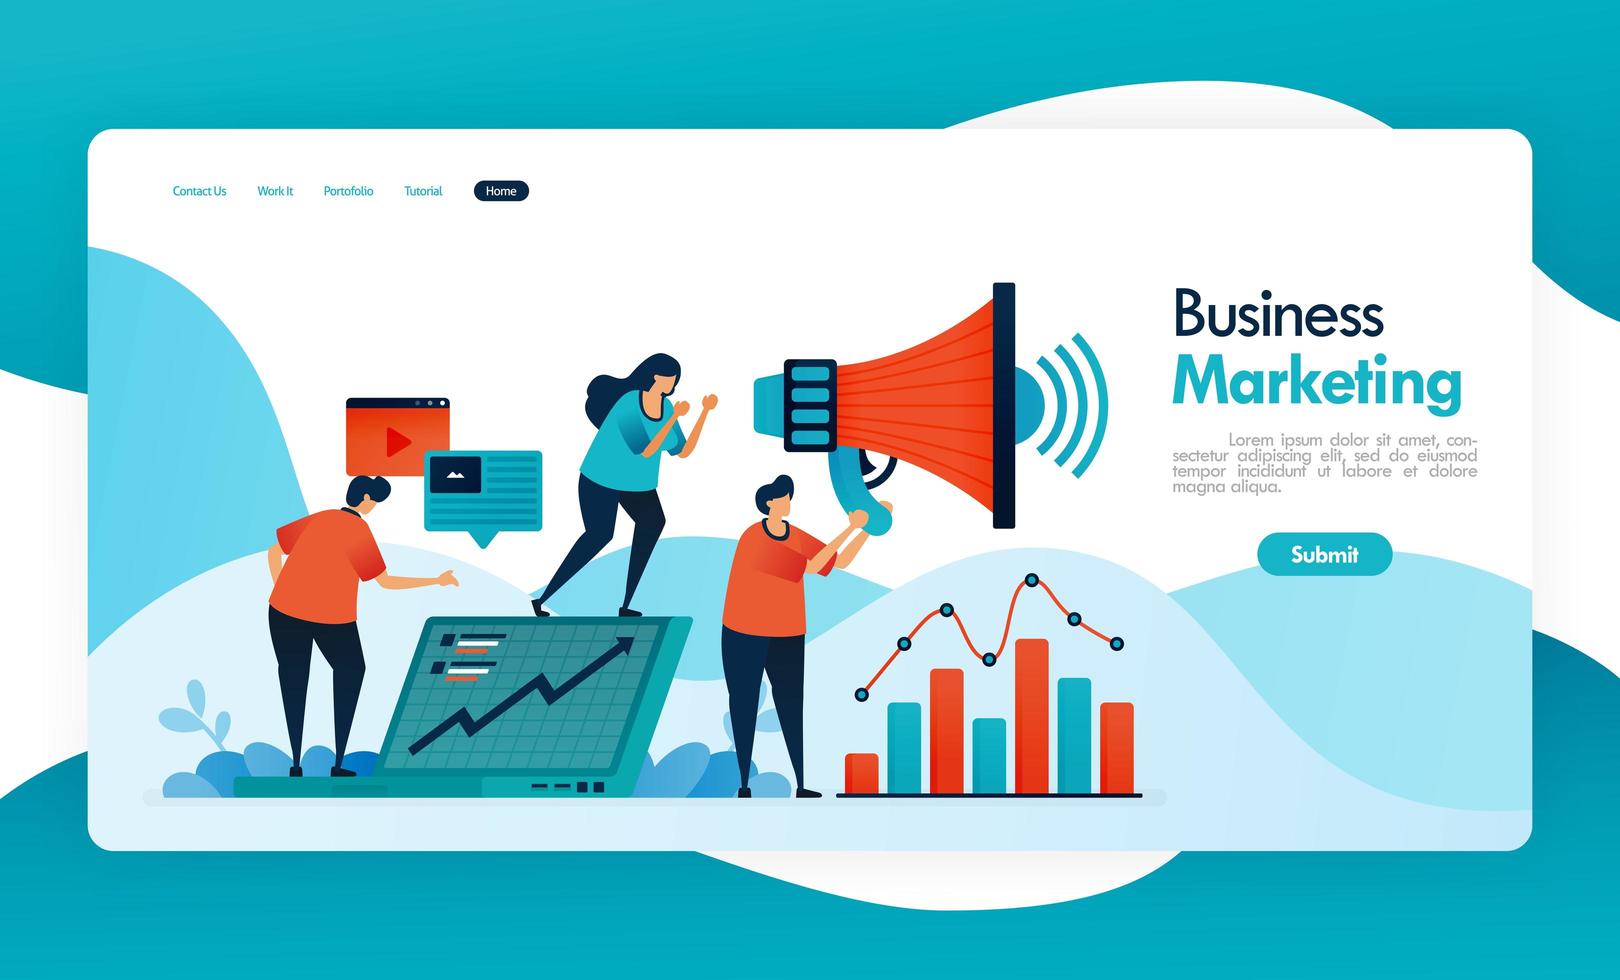 business banner for refer a friend, referral MLM program, affiliate agent and marketing, increase income by inviting friend, megaphone for promotion and ads. vector design for flyer poster mobile apps